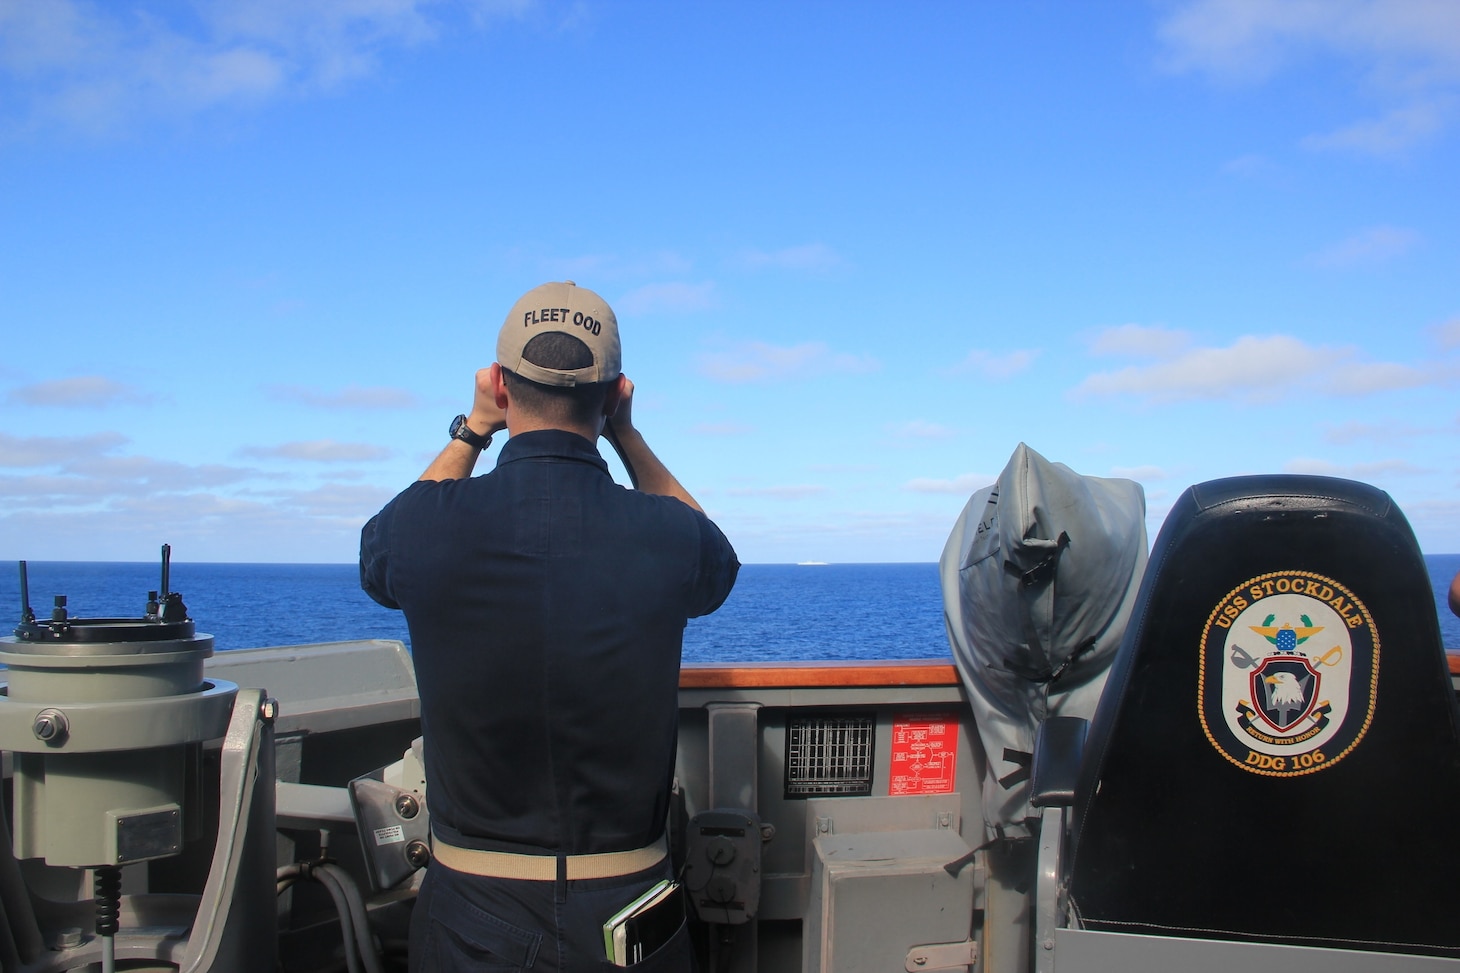 160305-N-ZZ999-041
SOUTH CHINA SEA (Mar. 05, 2016) – USS Stockdale’s (DDG 106) officer of the deck scans the horizon for other surface vessels during a routine patrol in the South China Sea.  Providing a ready force supporting security and stability in the Indo-Asia-Pacific, Stockdale is operating as part of the John C. Stennis Strike Group and Great Green Fleet on a regularly scheduled 7th Fleet deployment. (U.S. Navy photo by Ensign Molly Hanna /Unreleased)